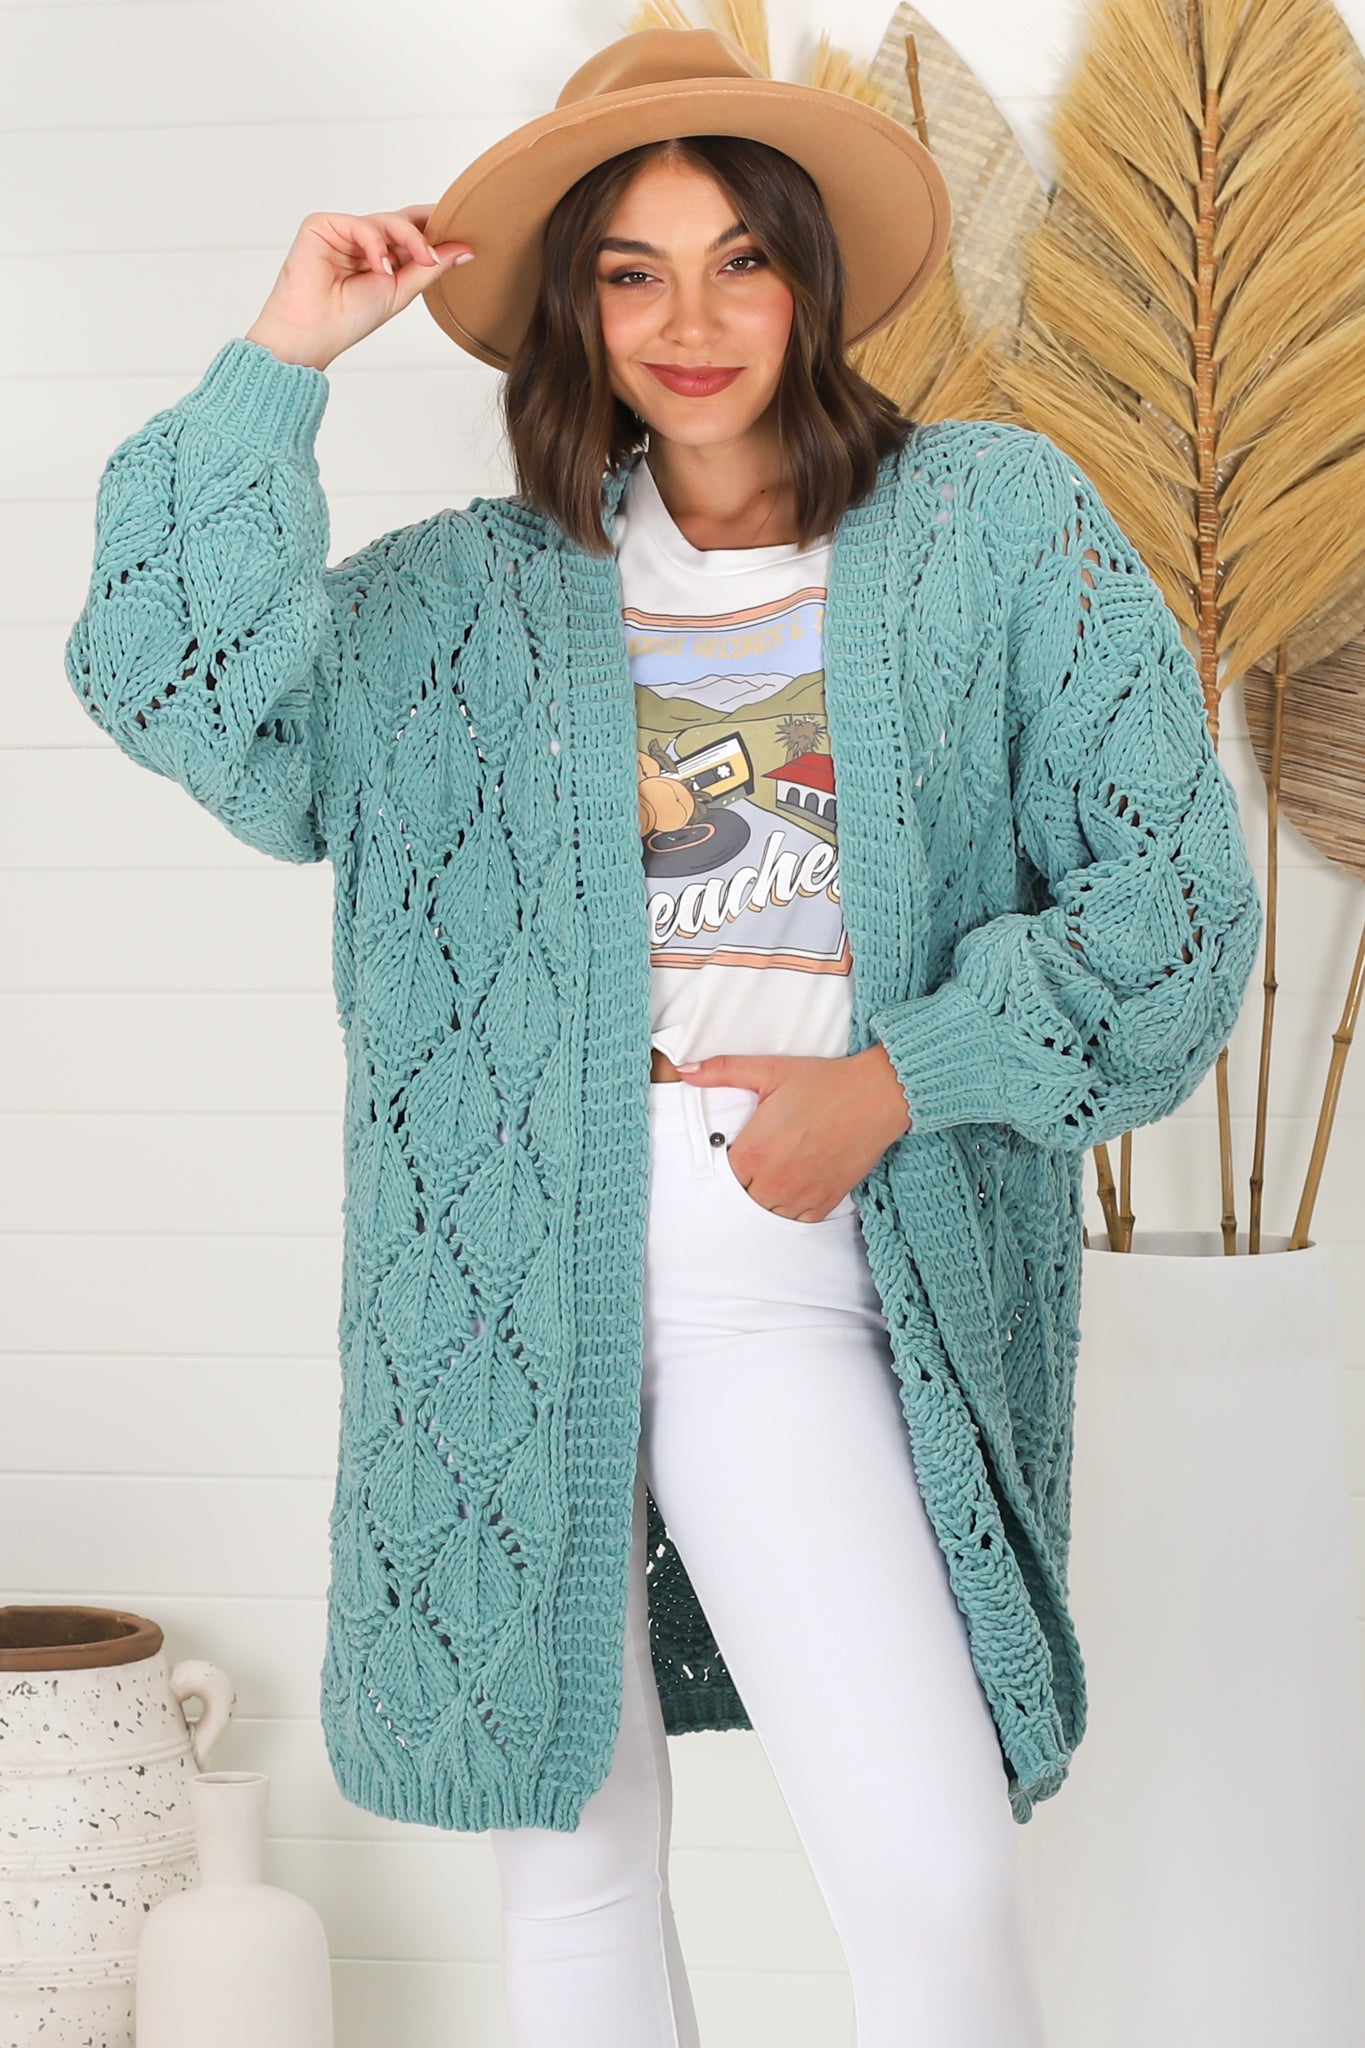 Townsend Cardigan - Open Knit Cardigan with Long Sleeves in Seafoam Green